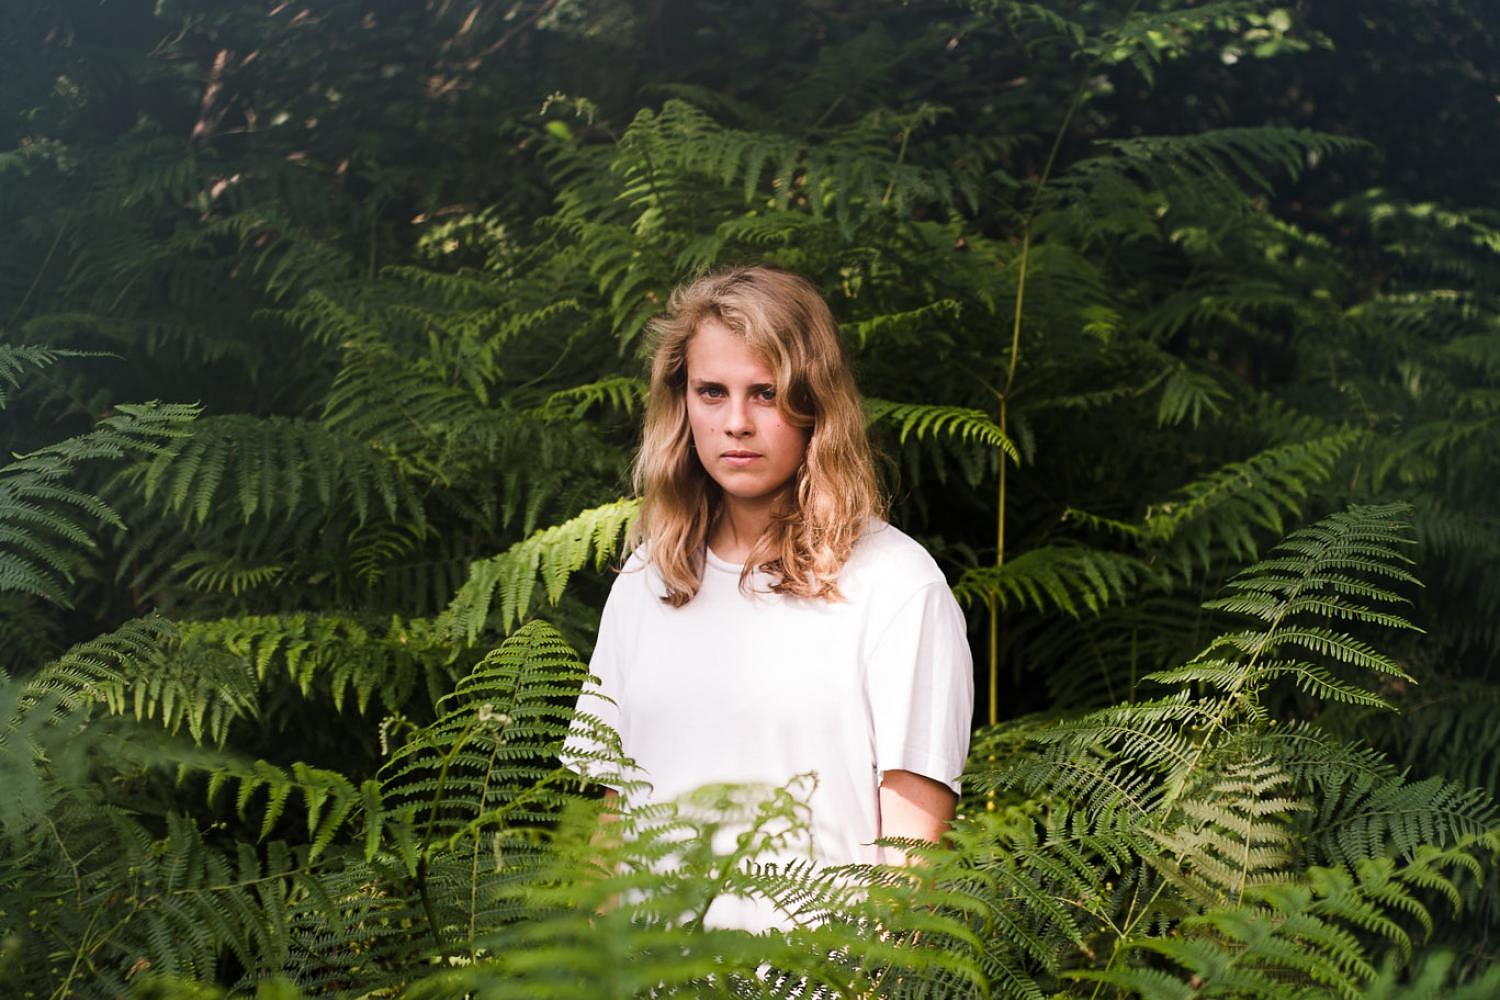 Marika Hackman previews new album with the stunning ‘Animal Fear’